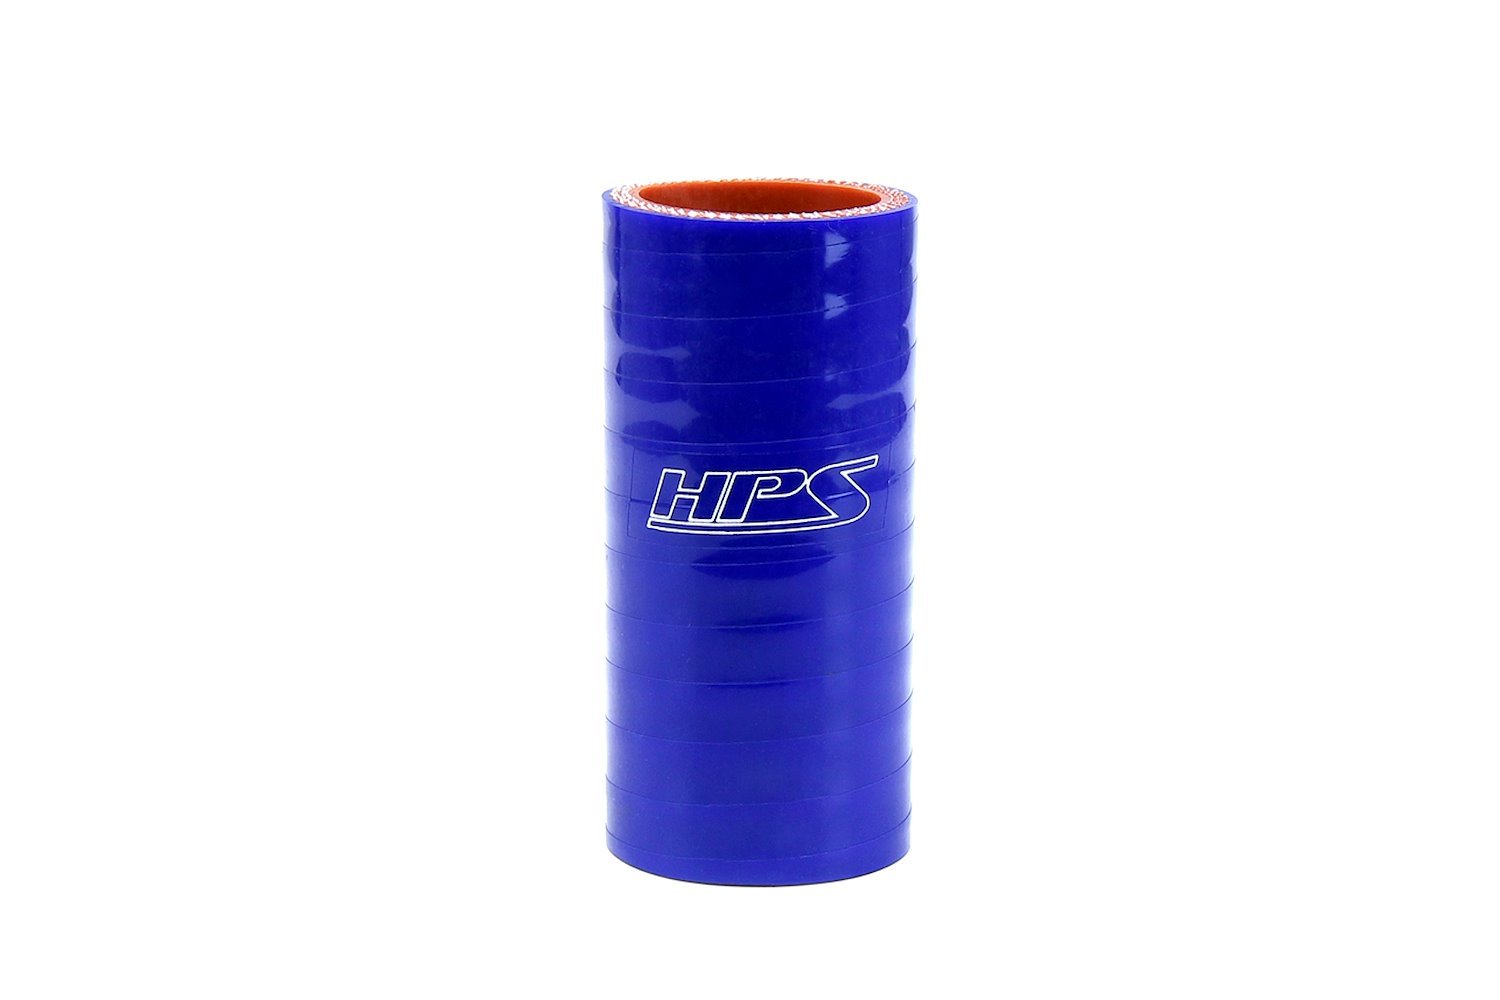 HTSC-138-BLUE Silicone Coupler Hose, High-Temp 4-Ply Reinforced, 1-3/8 in. ID, 3 in. Long, Blue